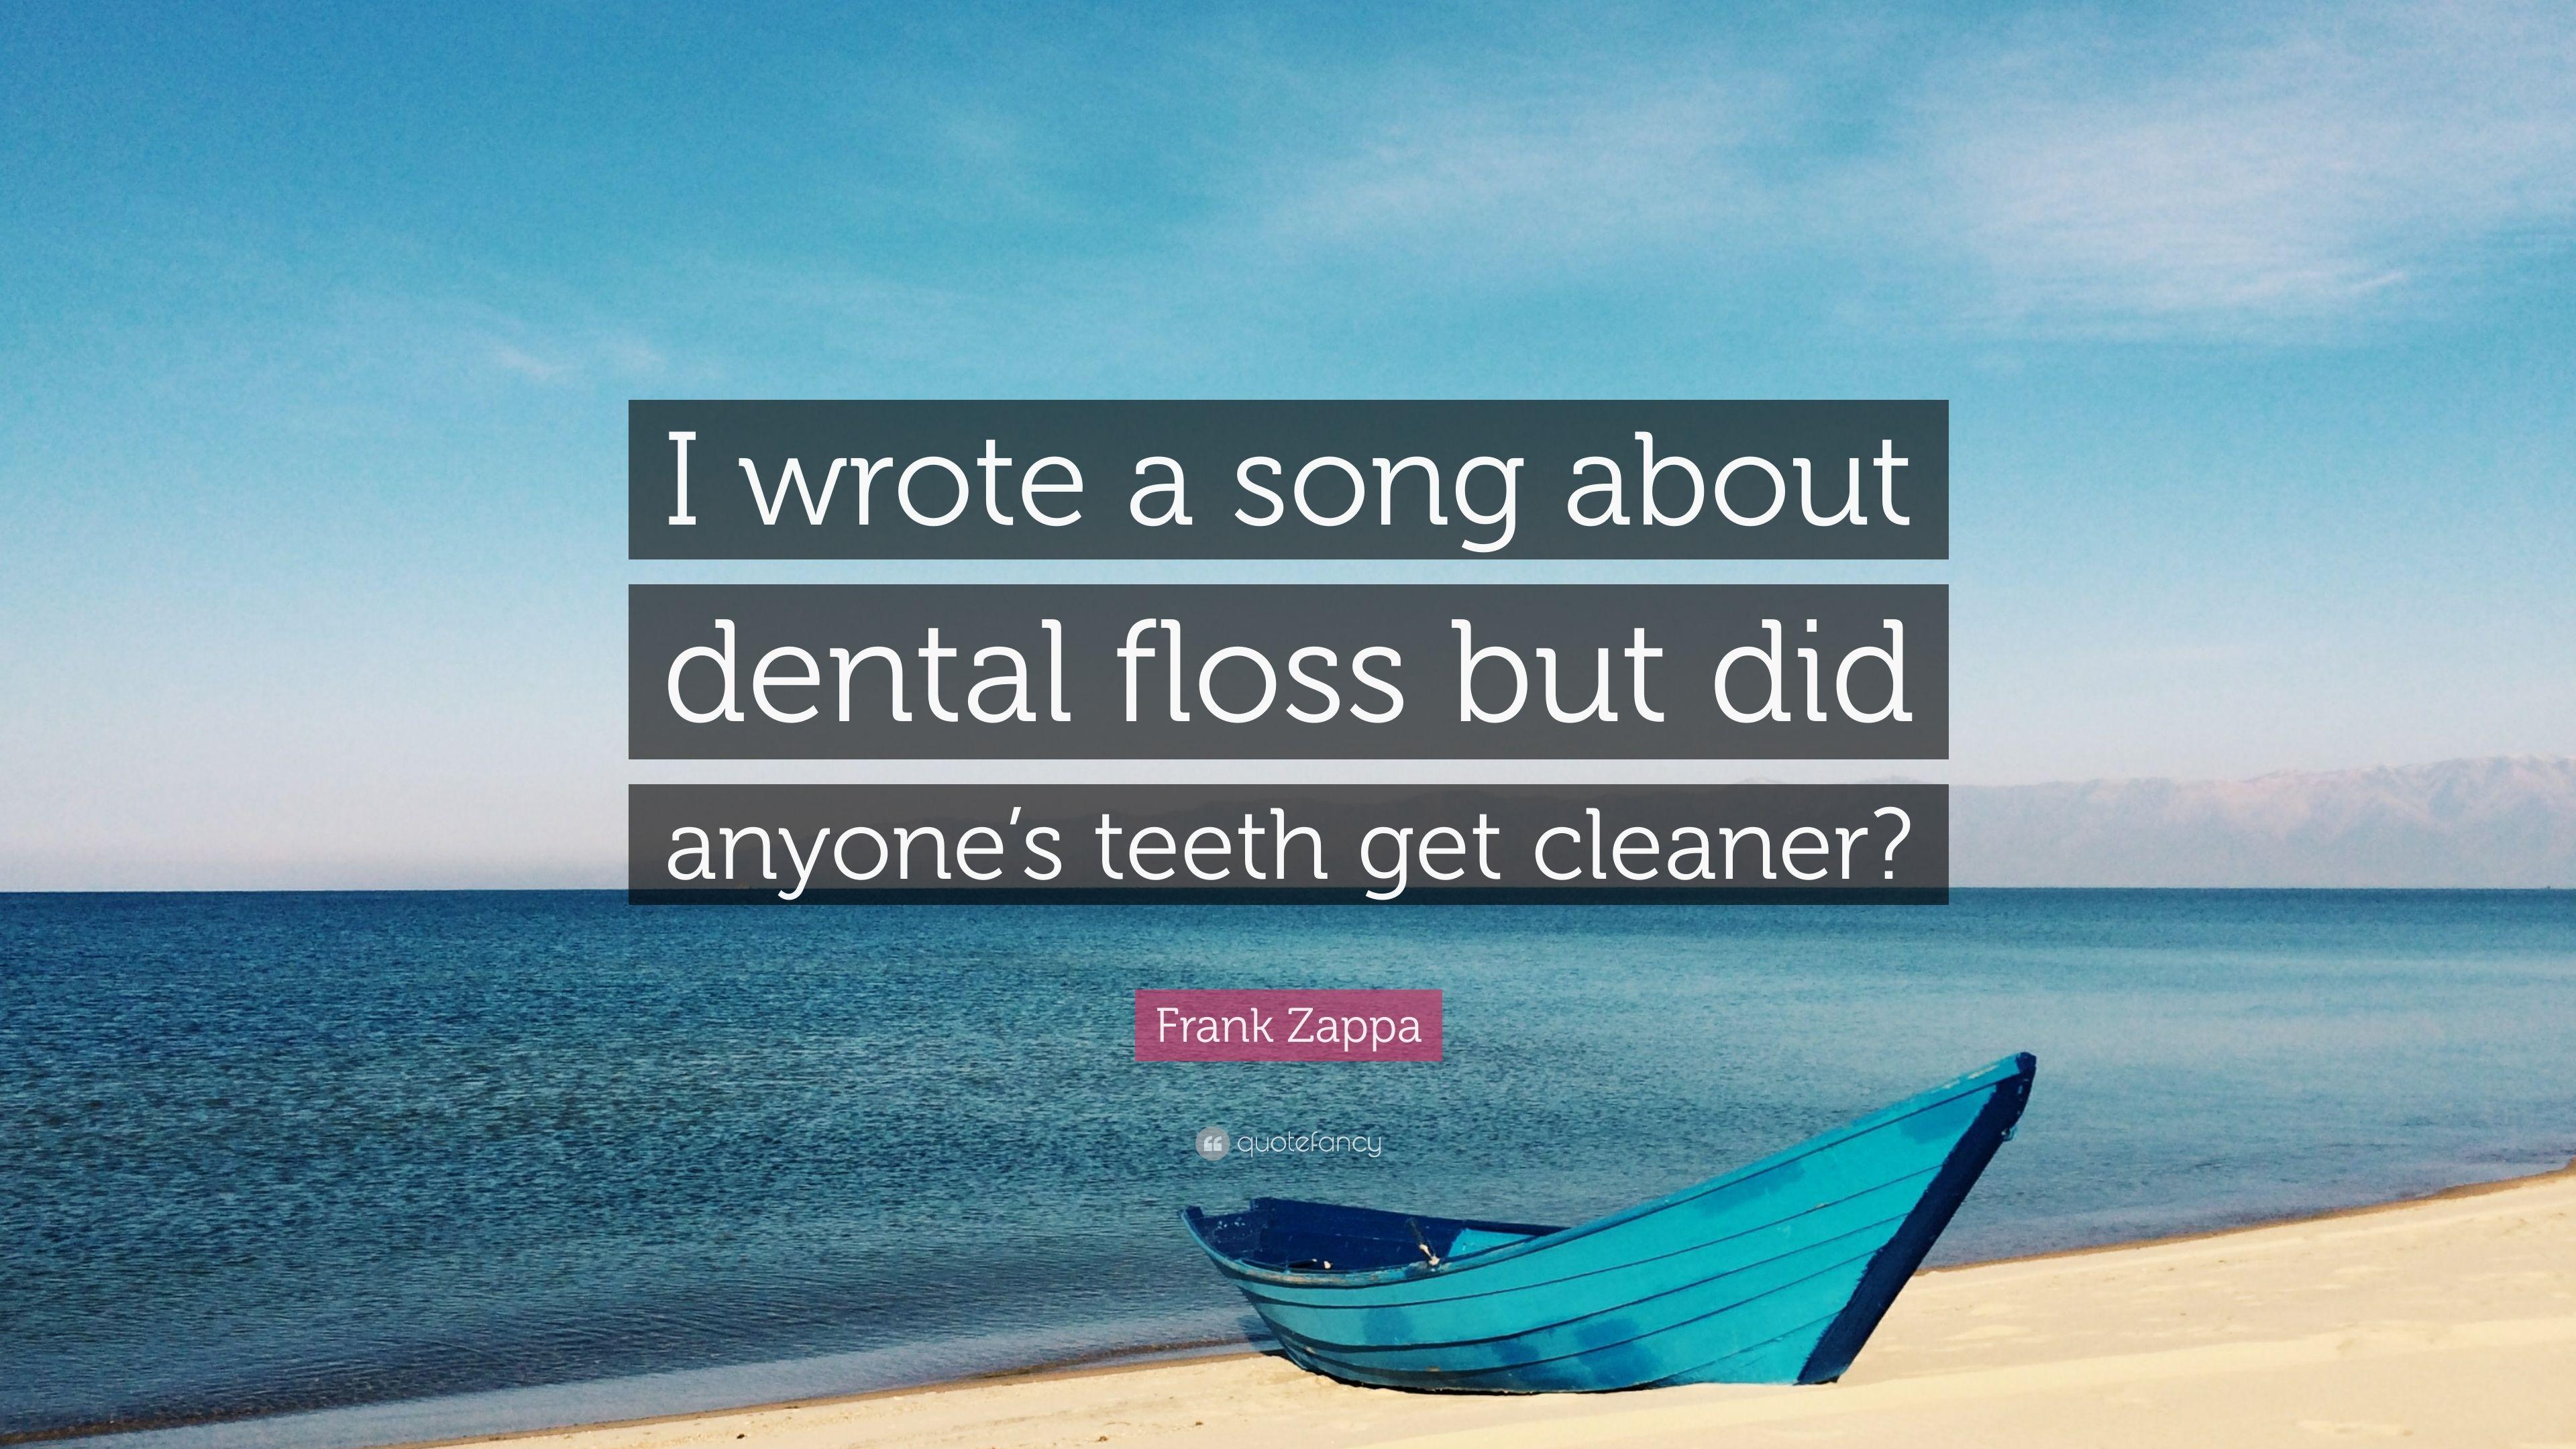 Frank Zappa Quote: “I wrote a song about dental floss but did